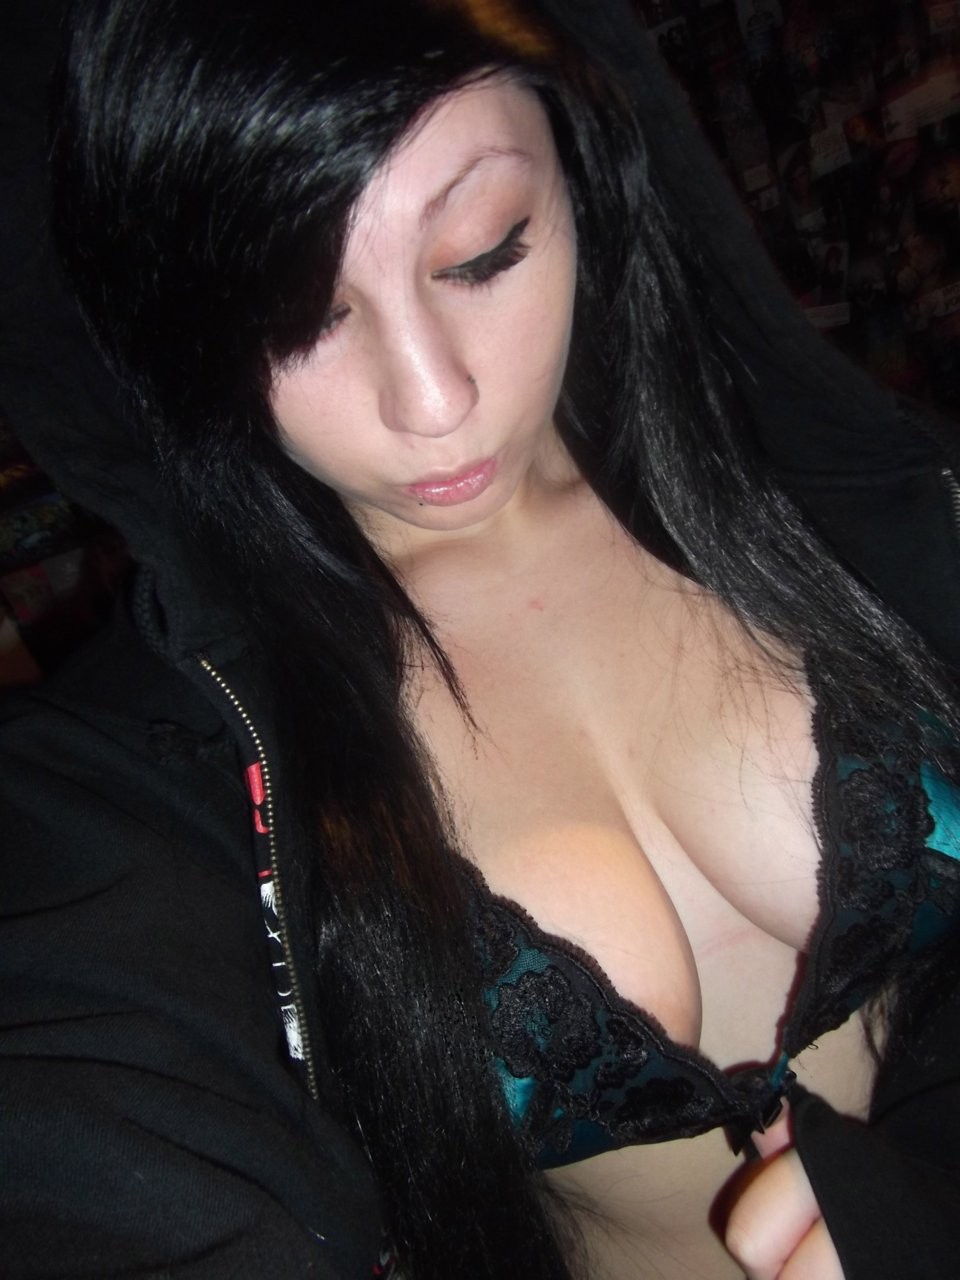 Friday Unearthly Cleavage Knockout